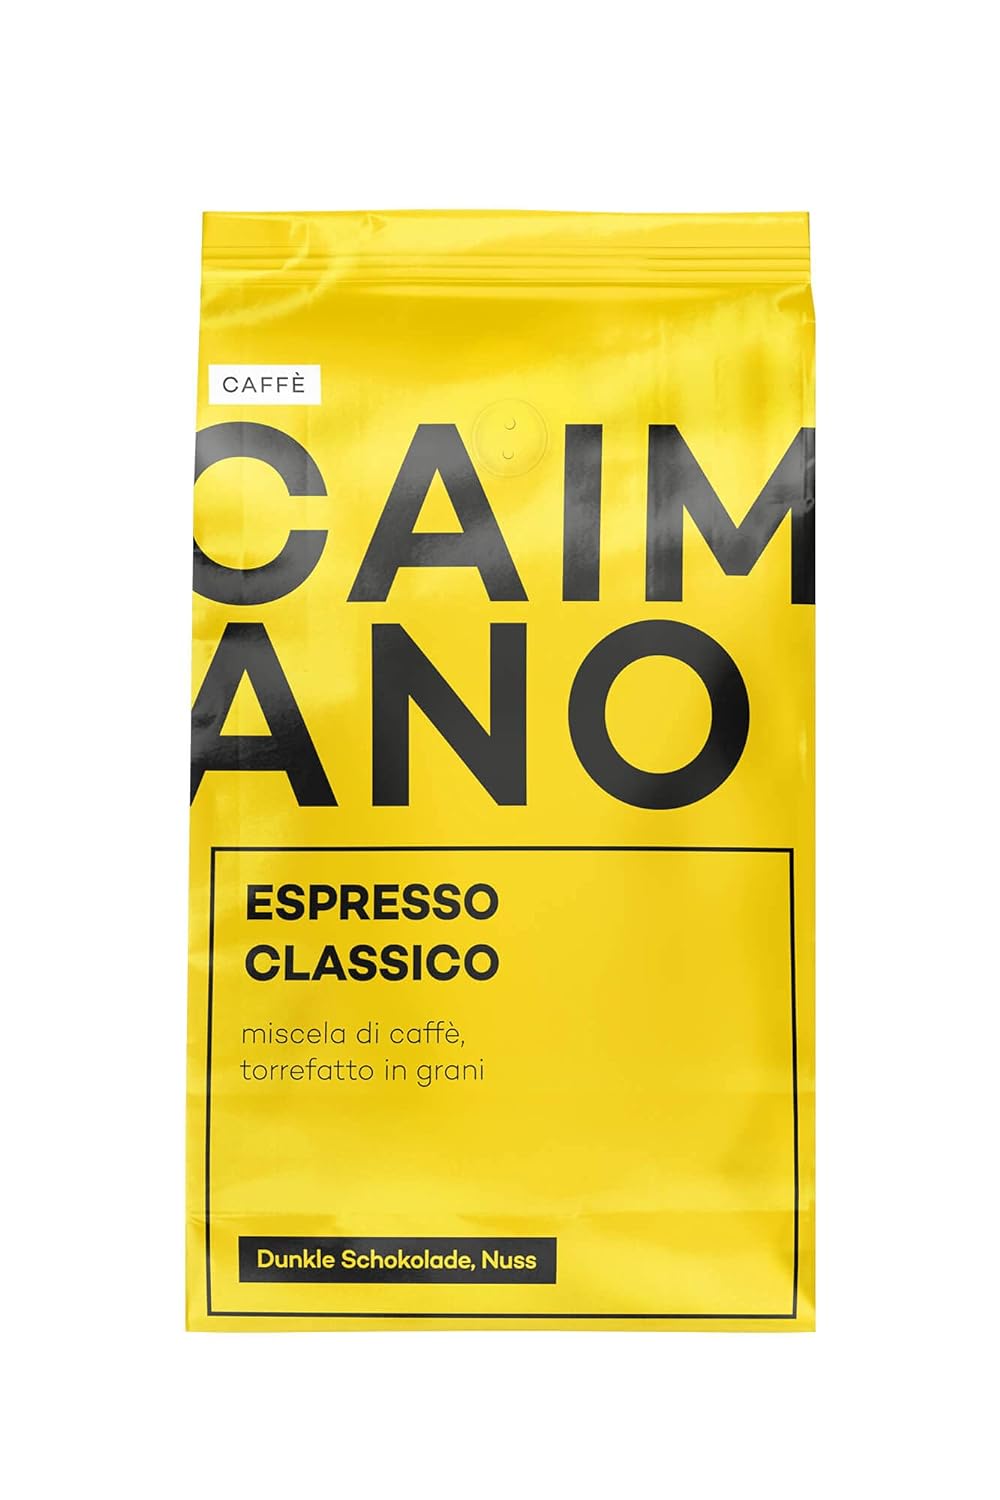 CAIMANO® Espresso Classico (1kg) Whole Espresso Beans - Ideal for portafilters & fully automatic coffee machines - Arabica/Robusta - Low acidity - Nutty, chocolaty
